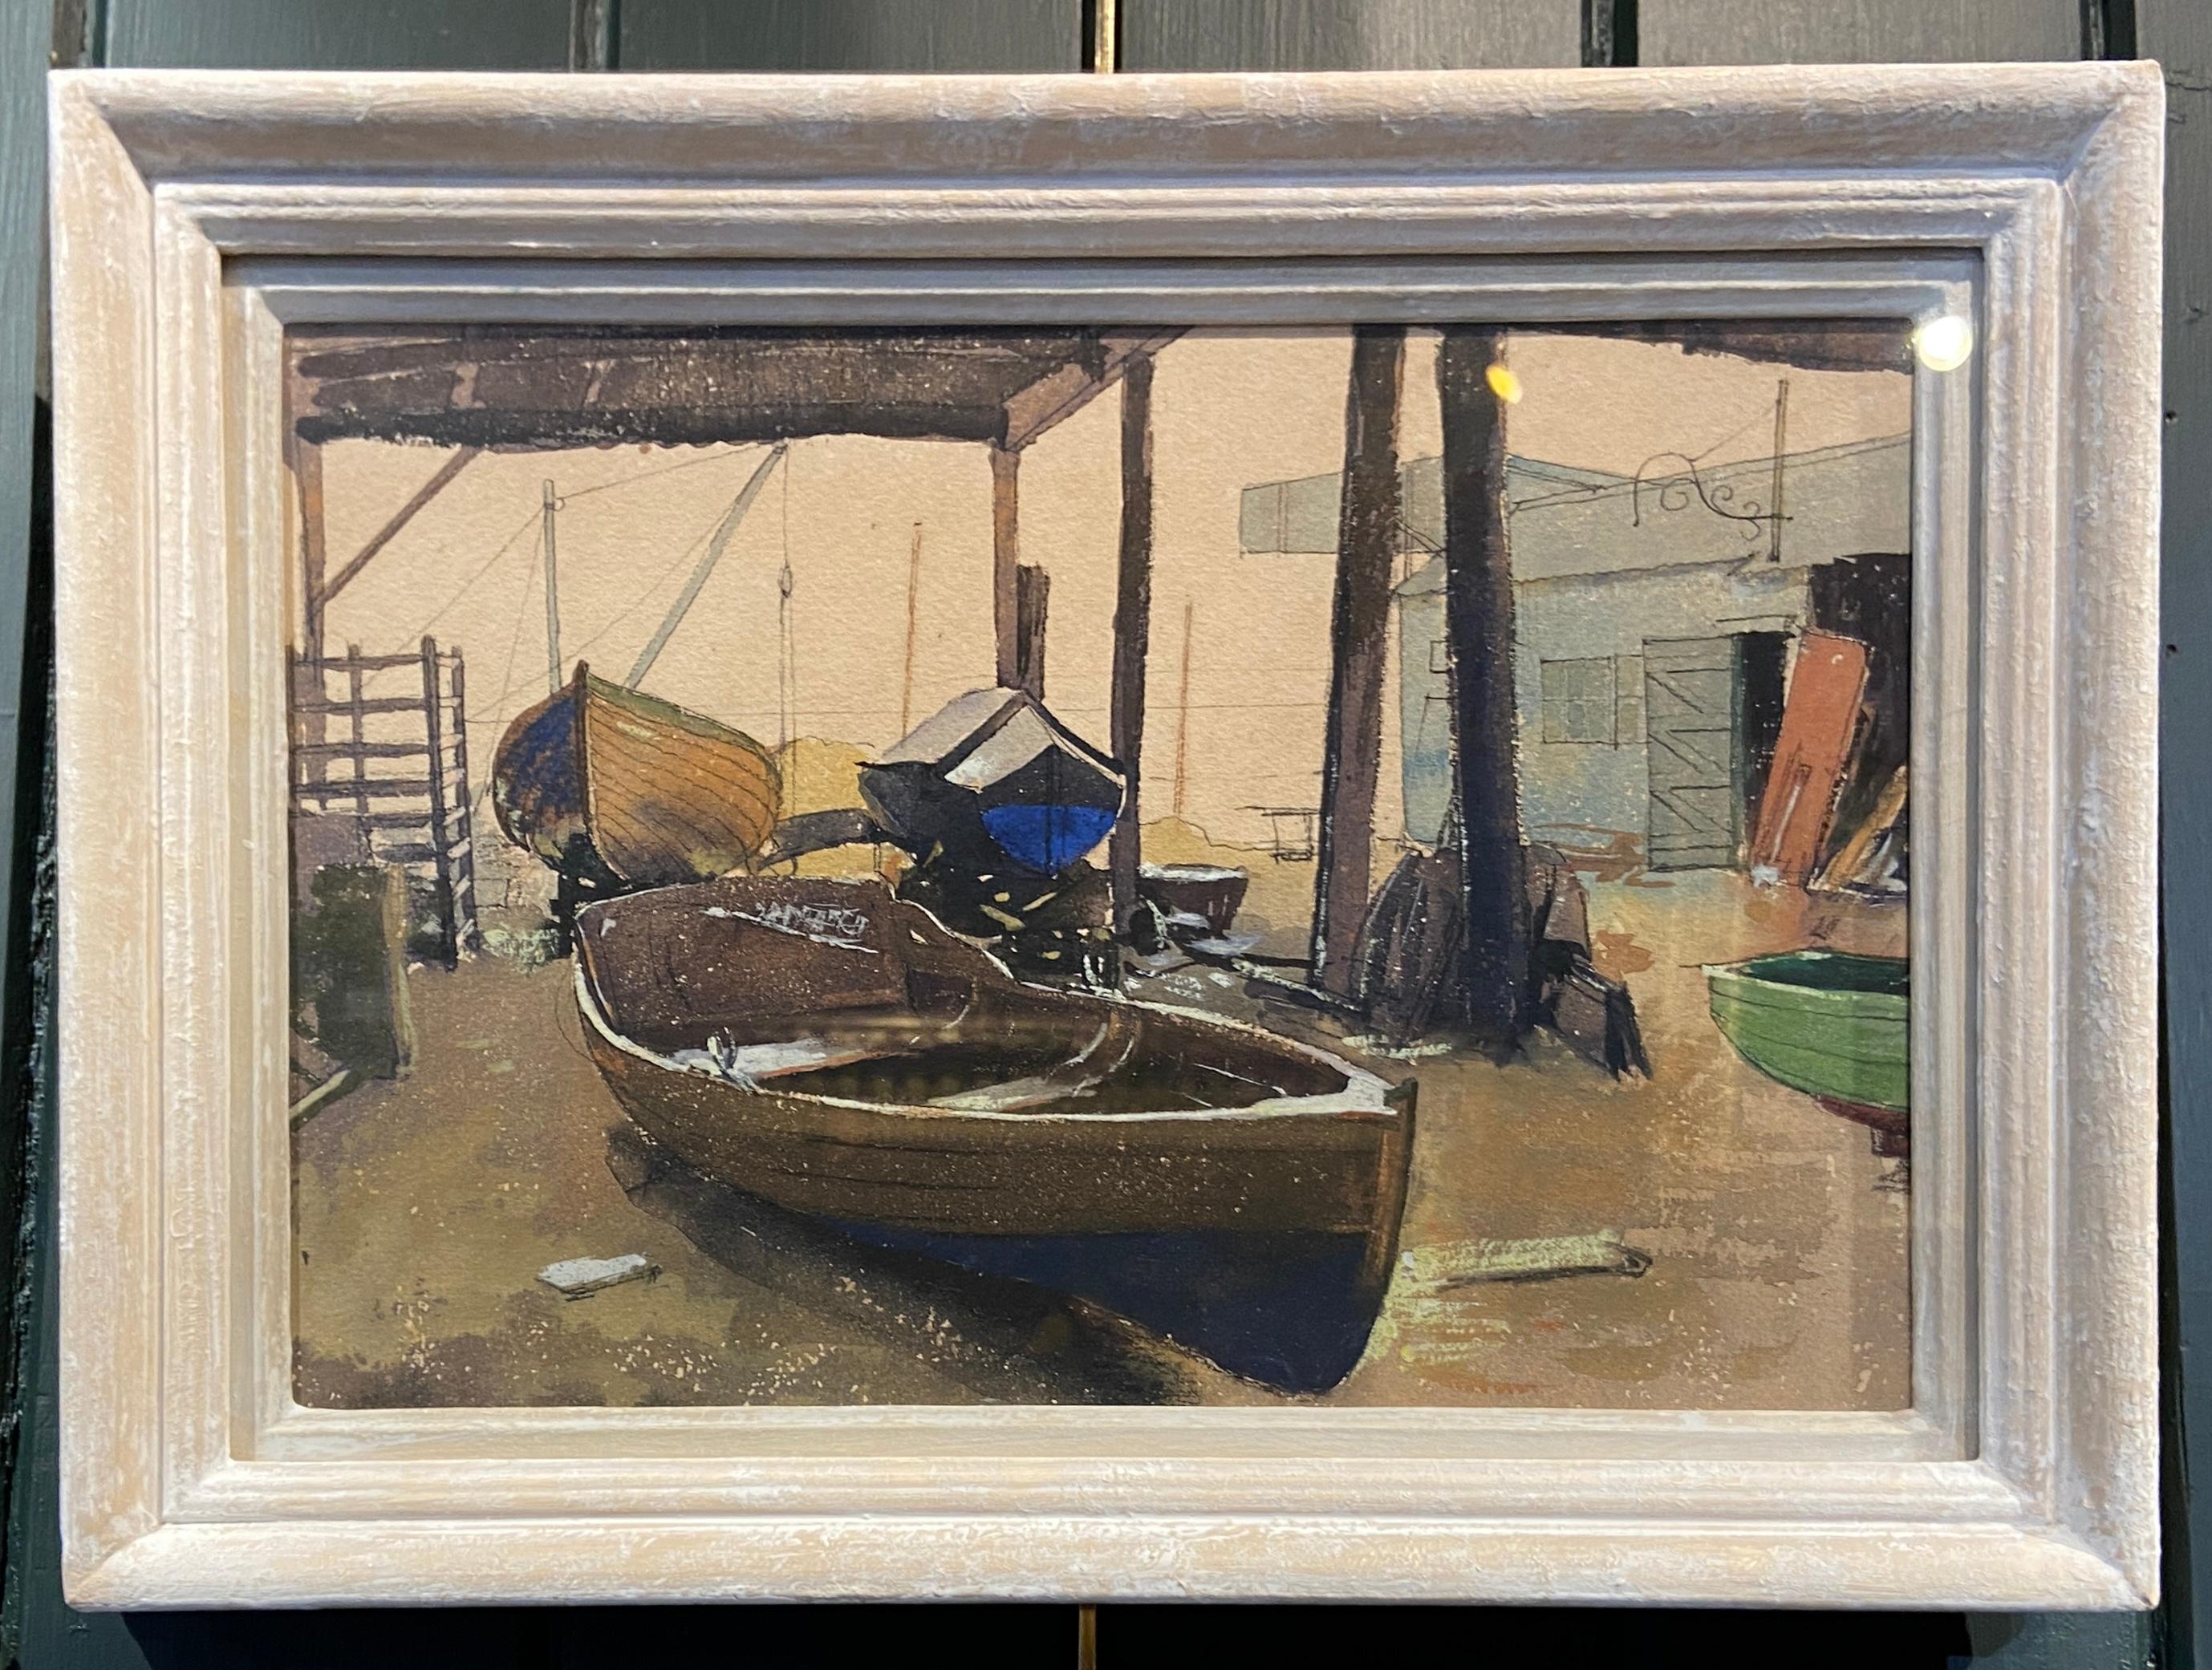 Watercolour and graphite on paper
Image size: 15 1/4 x 11 1/4 inches (38.75 x 28.5 cm)

This wonderful 20th century watercolour painting depicts a small boat yard that is filled with fishing and pleasure vessels. It is possible that this work was